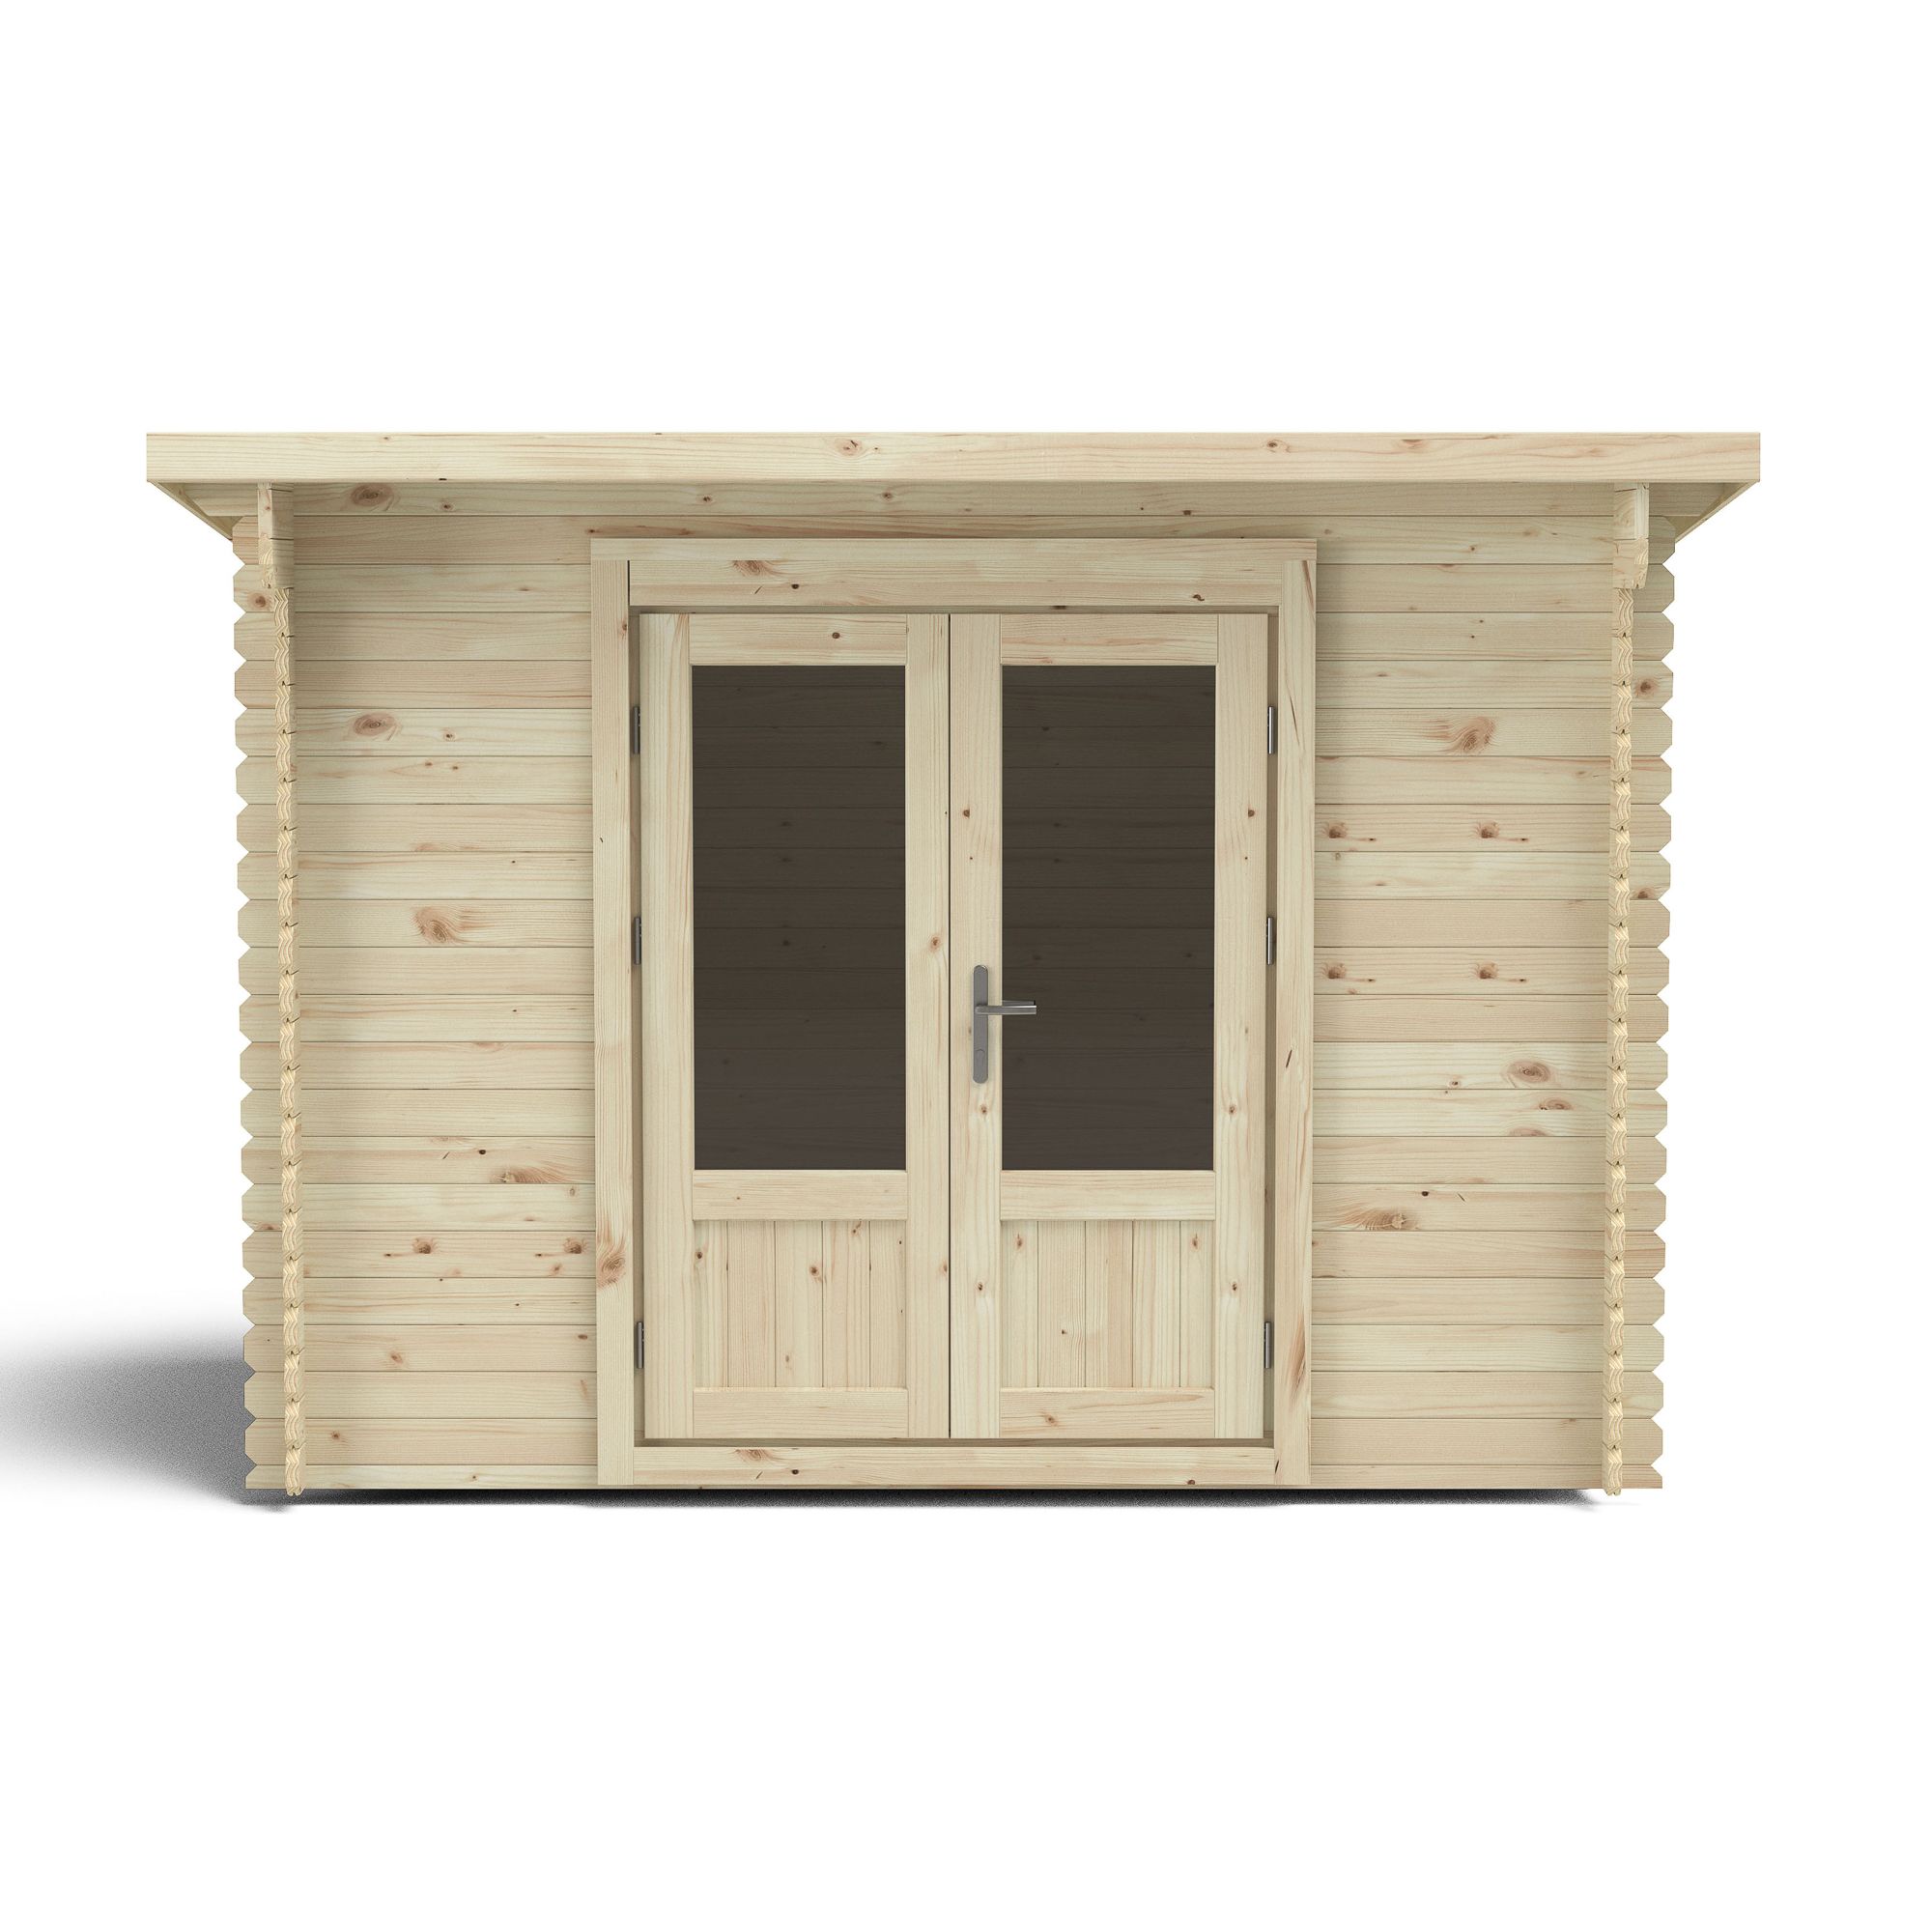 Forest Garden Harwood 2x3 ft Toughened glass with Double door Pent Wooden Cabin